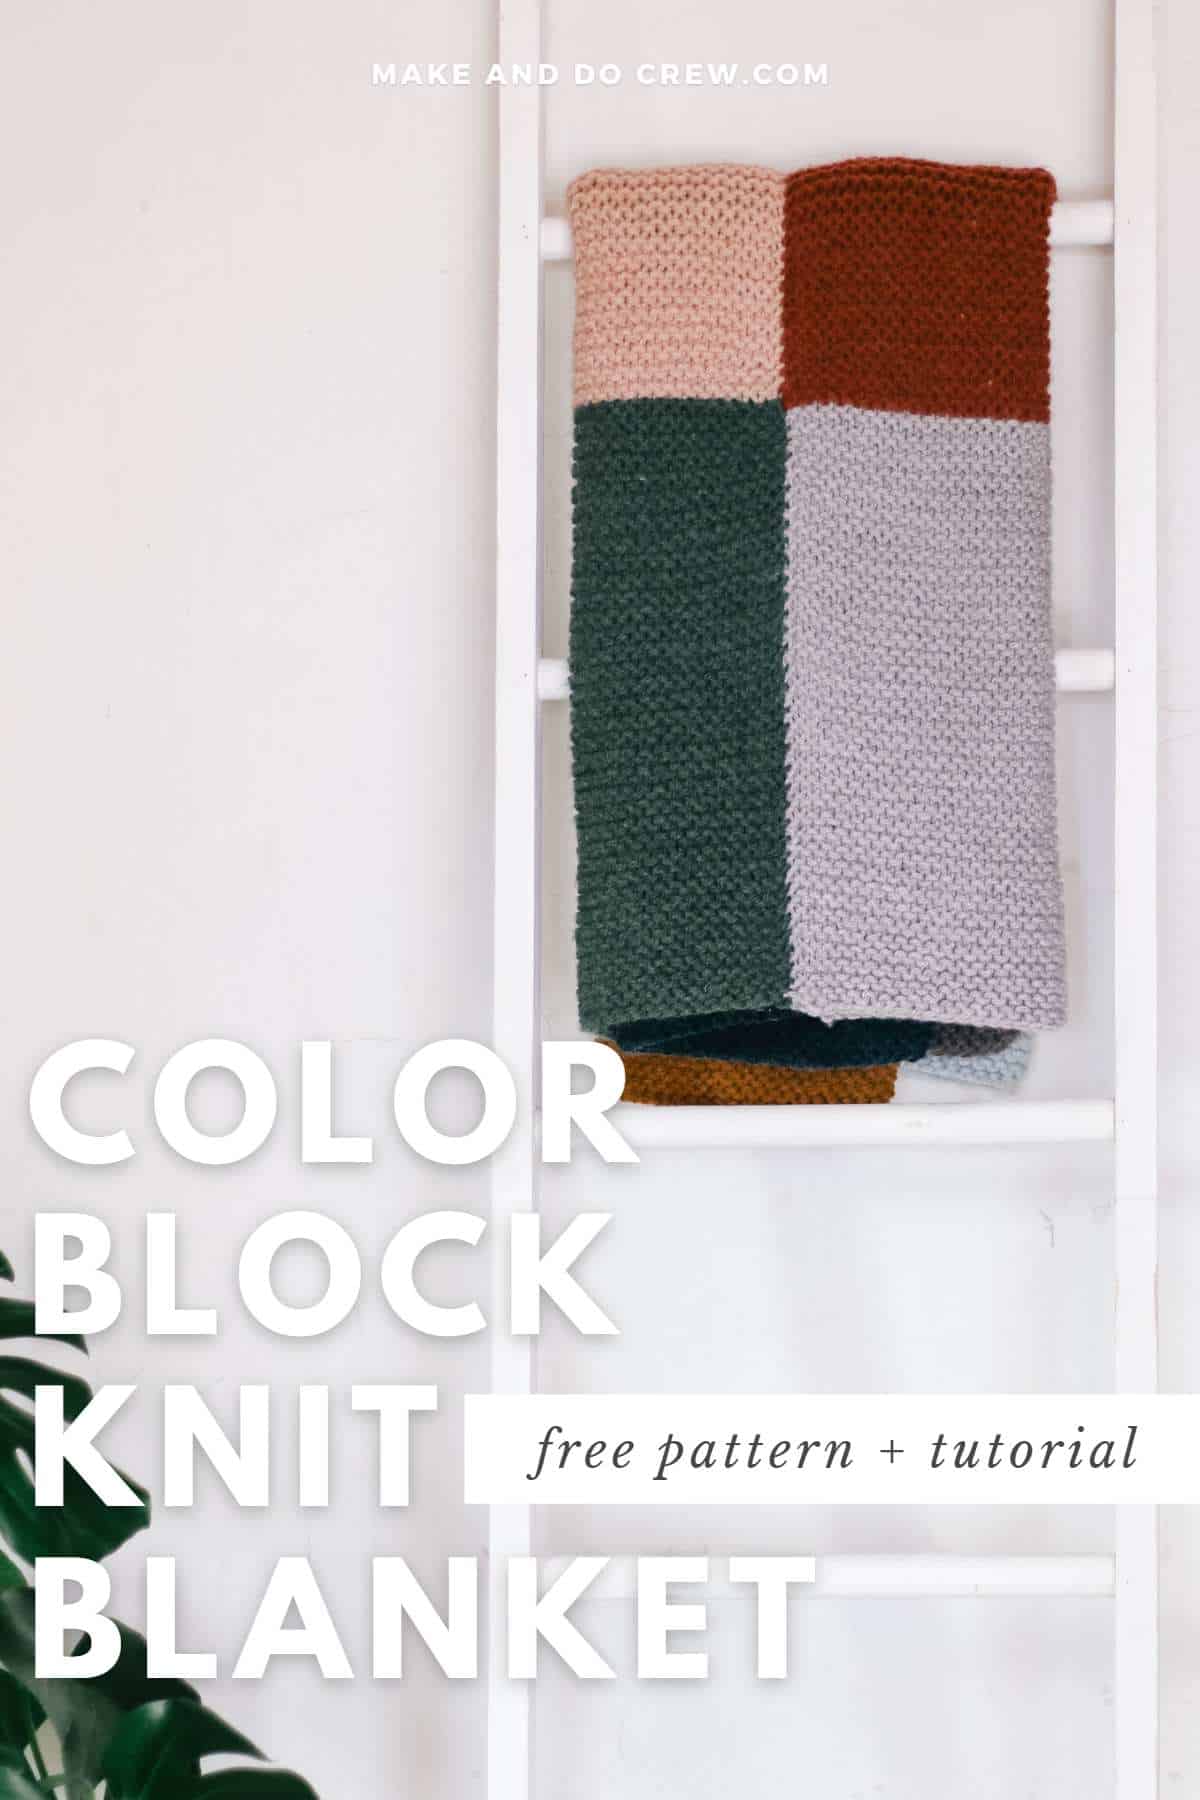 How to hand knit a blanket in 1 hour? Easy to follow tutorial